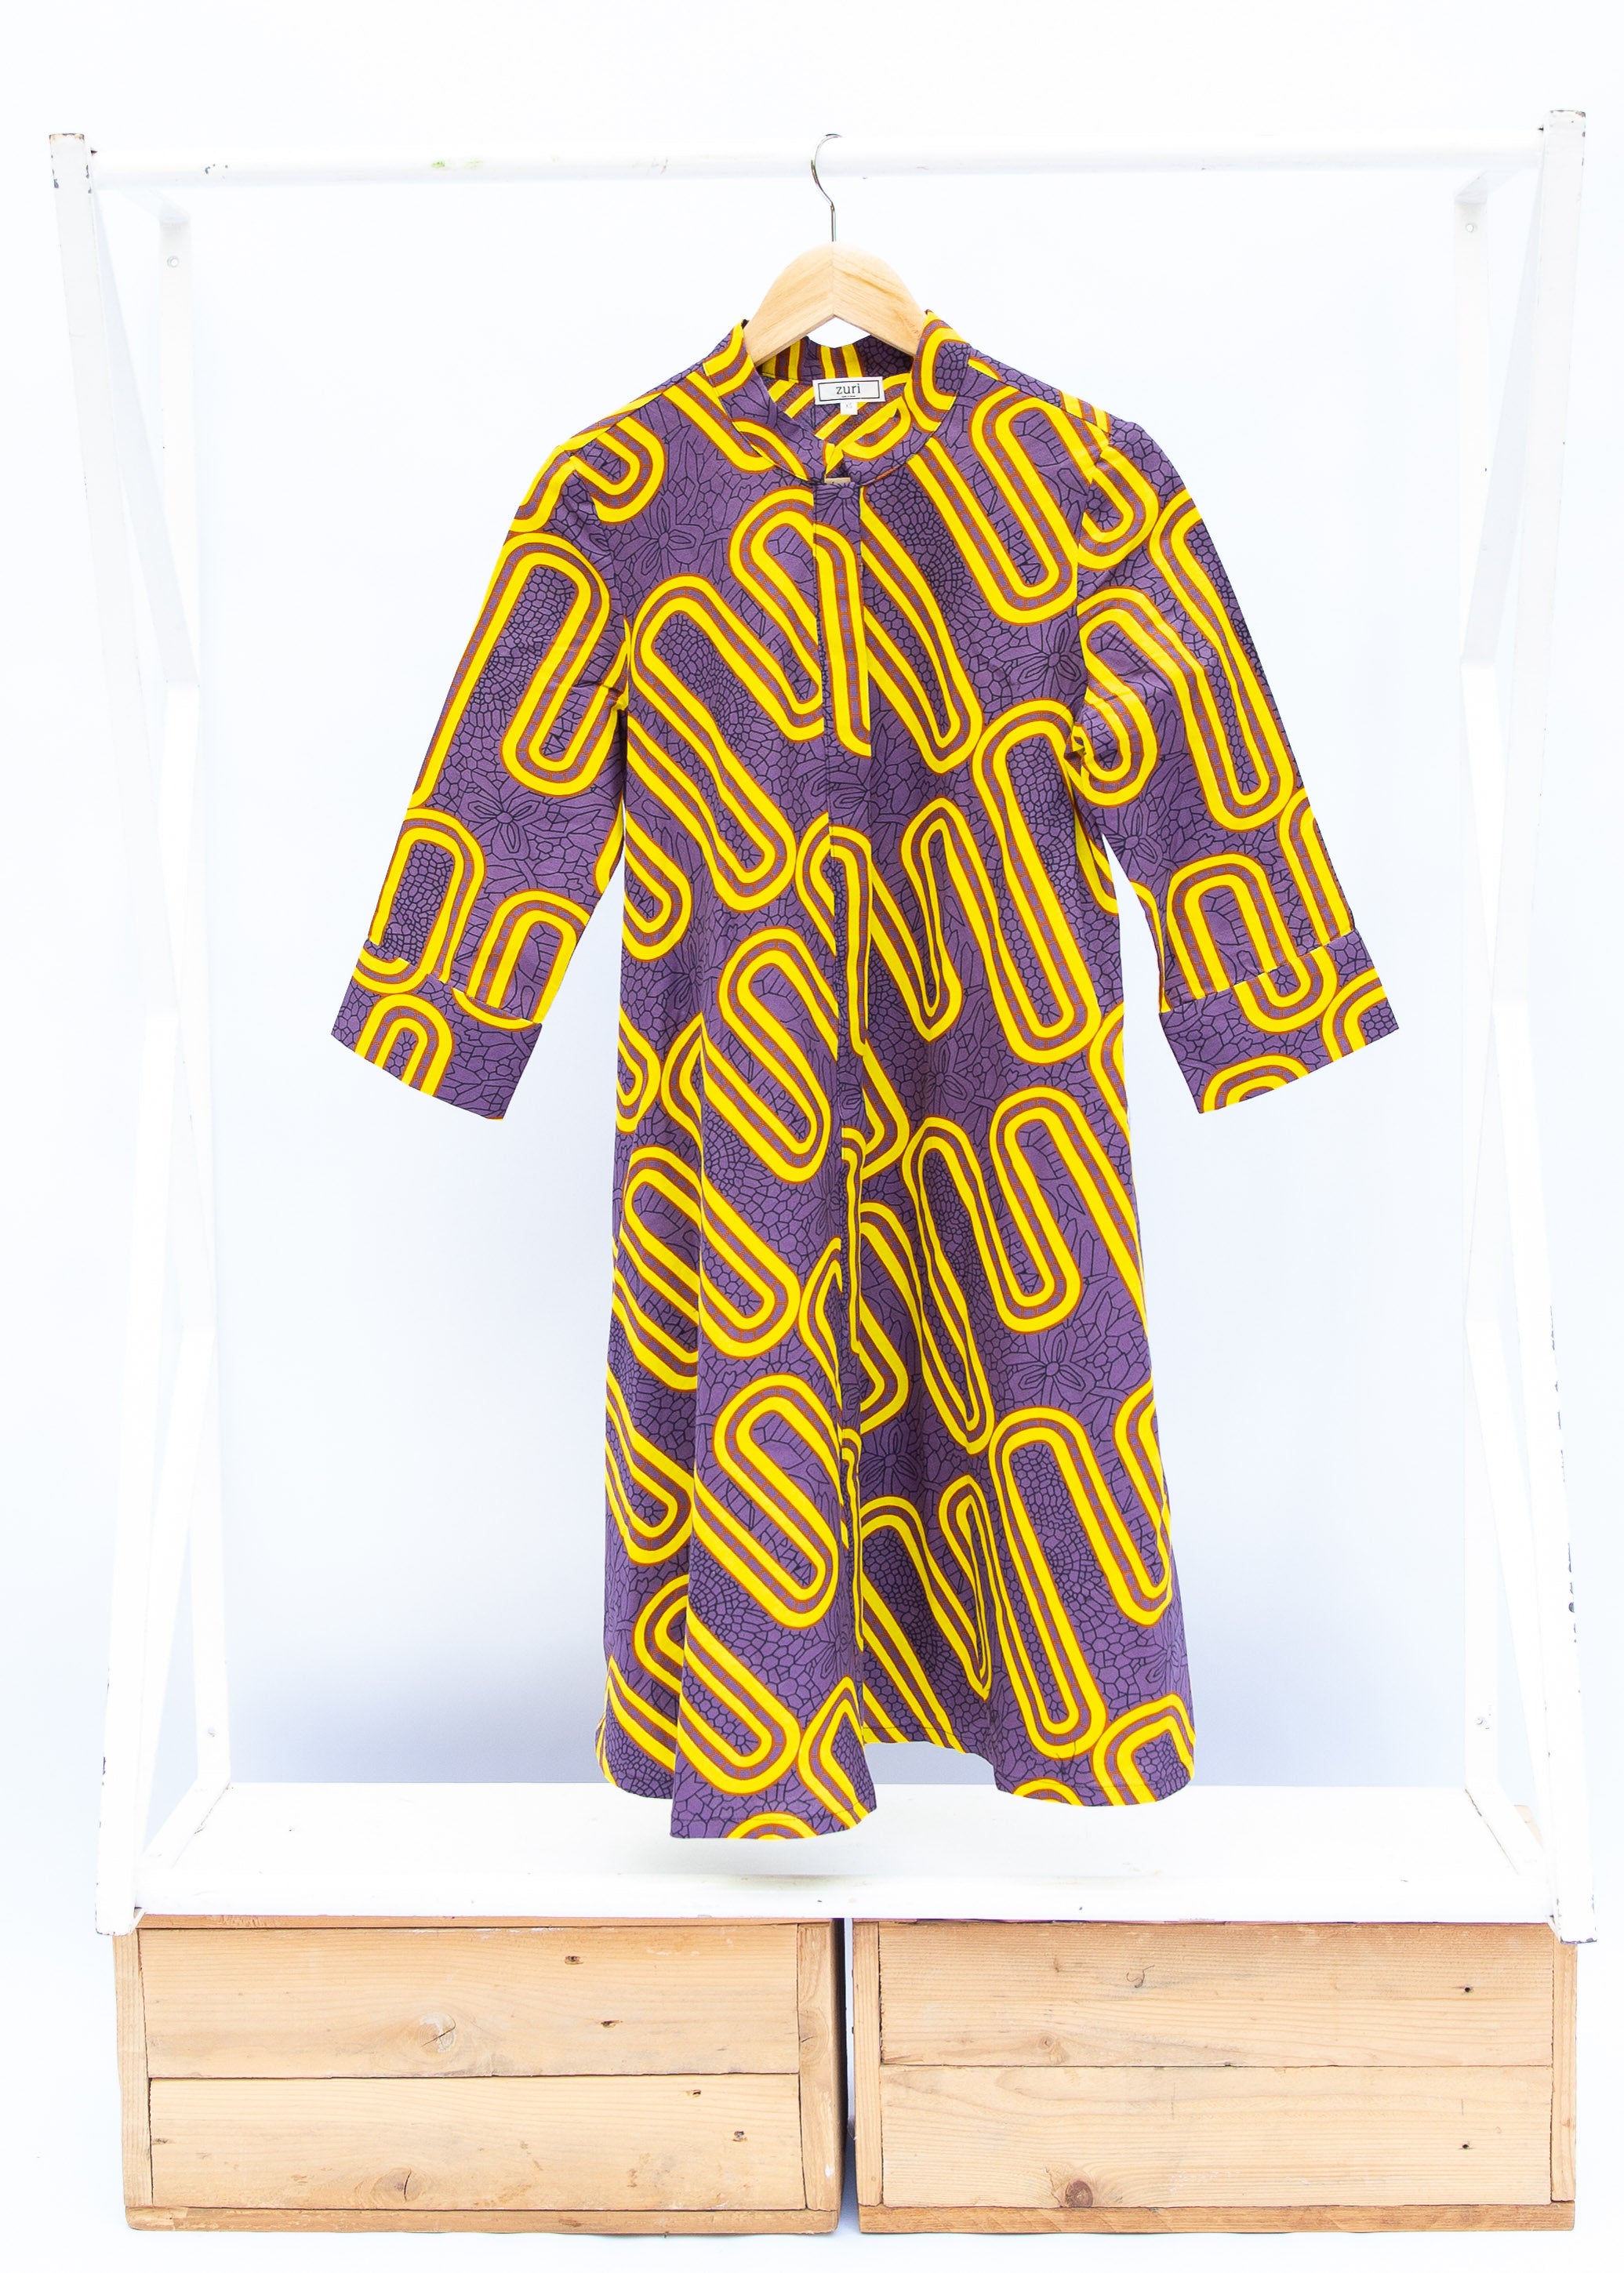 Purple dress with yellow squiggles